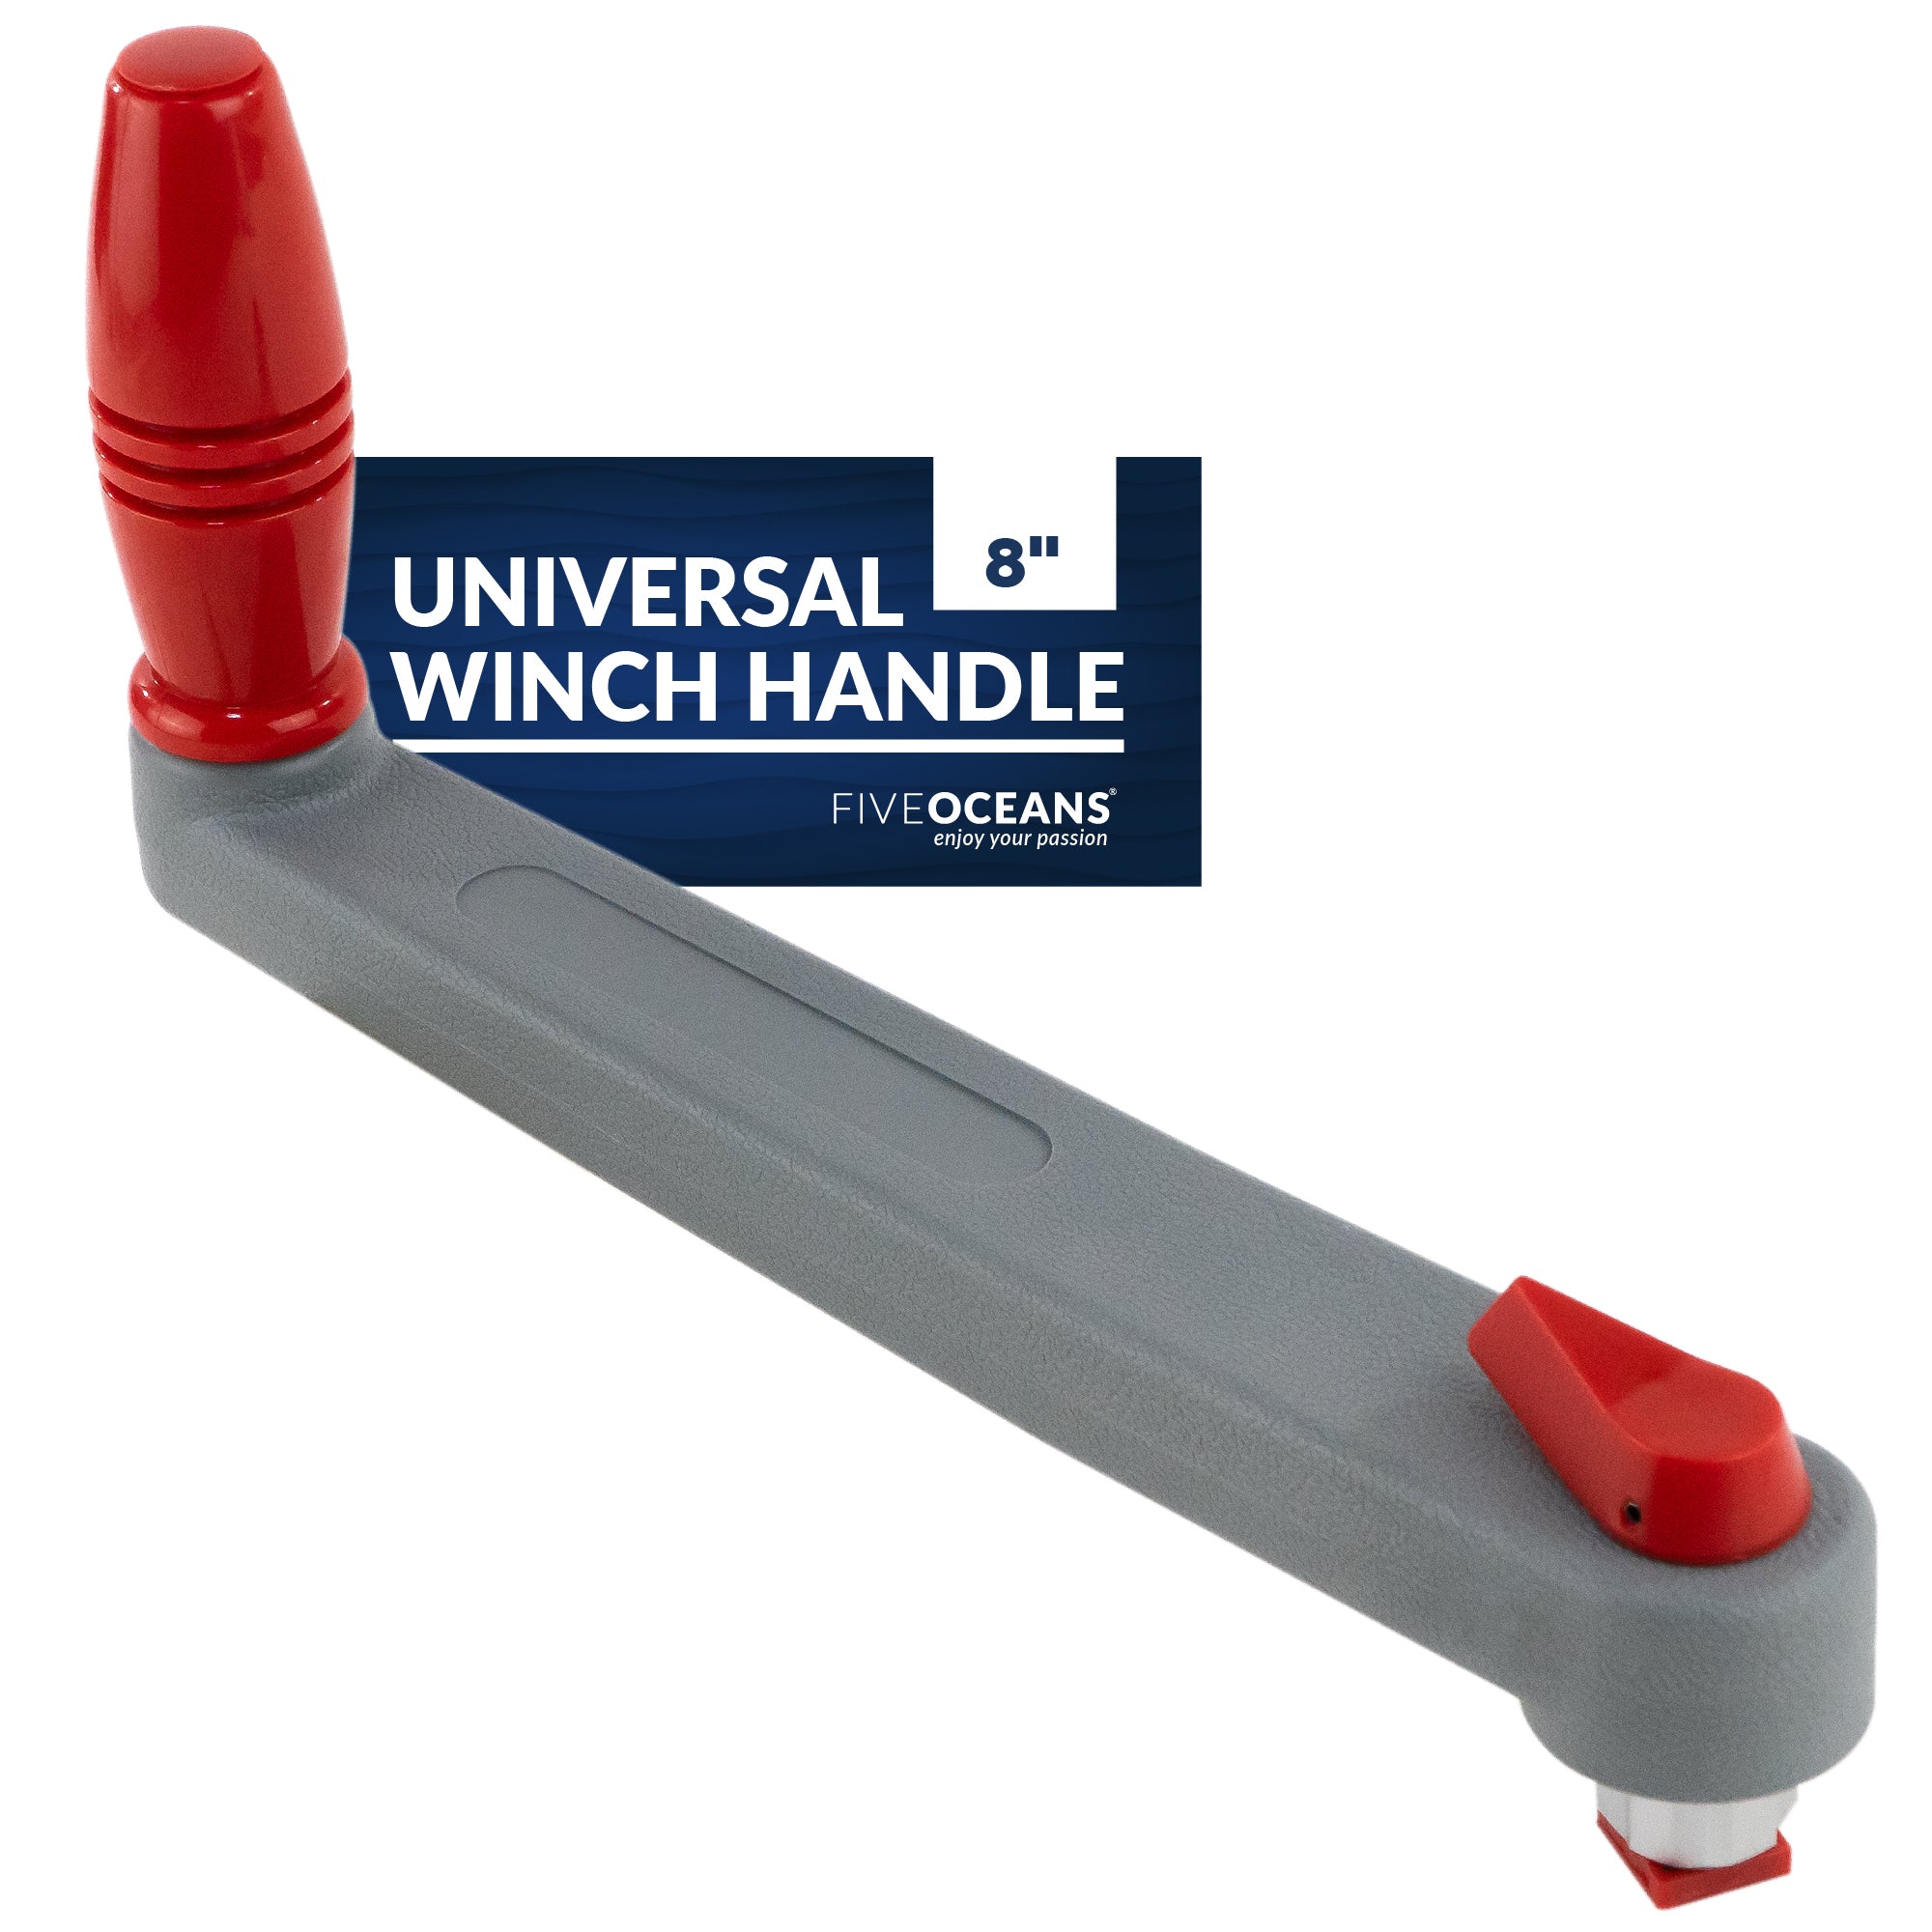 8" Sailboat Winch Handle, Universal Floating Lock-in Mechanism, Gray/Red - FO3923